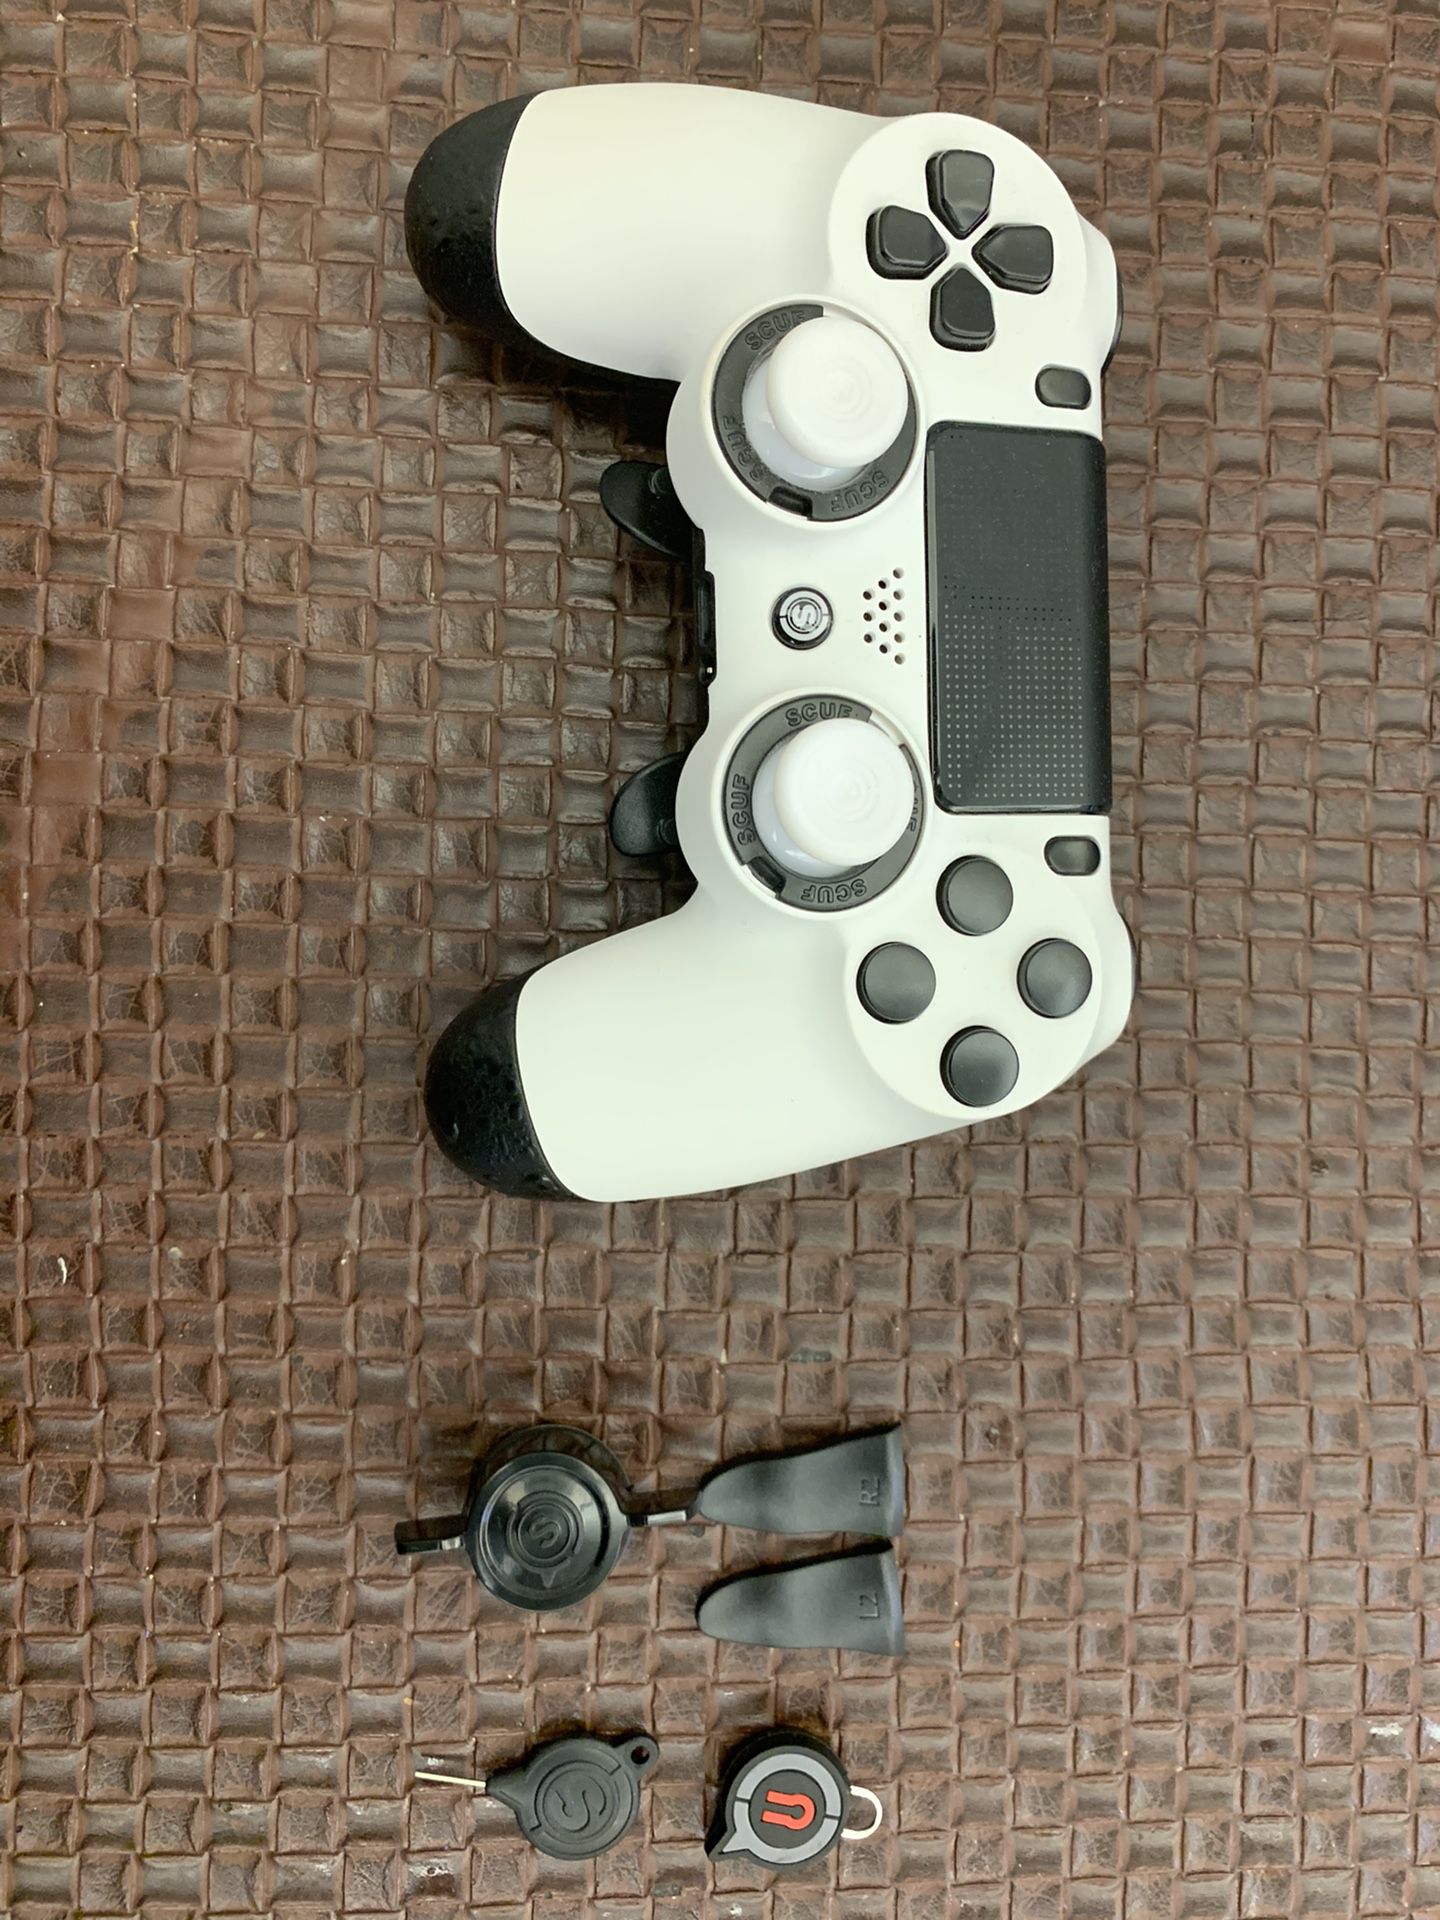 Scuff controller like brand new condition just used like 3 times